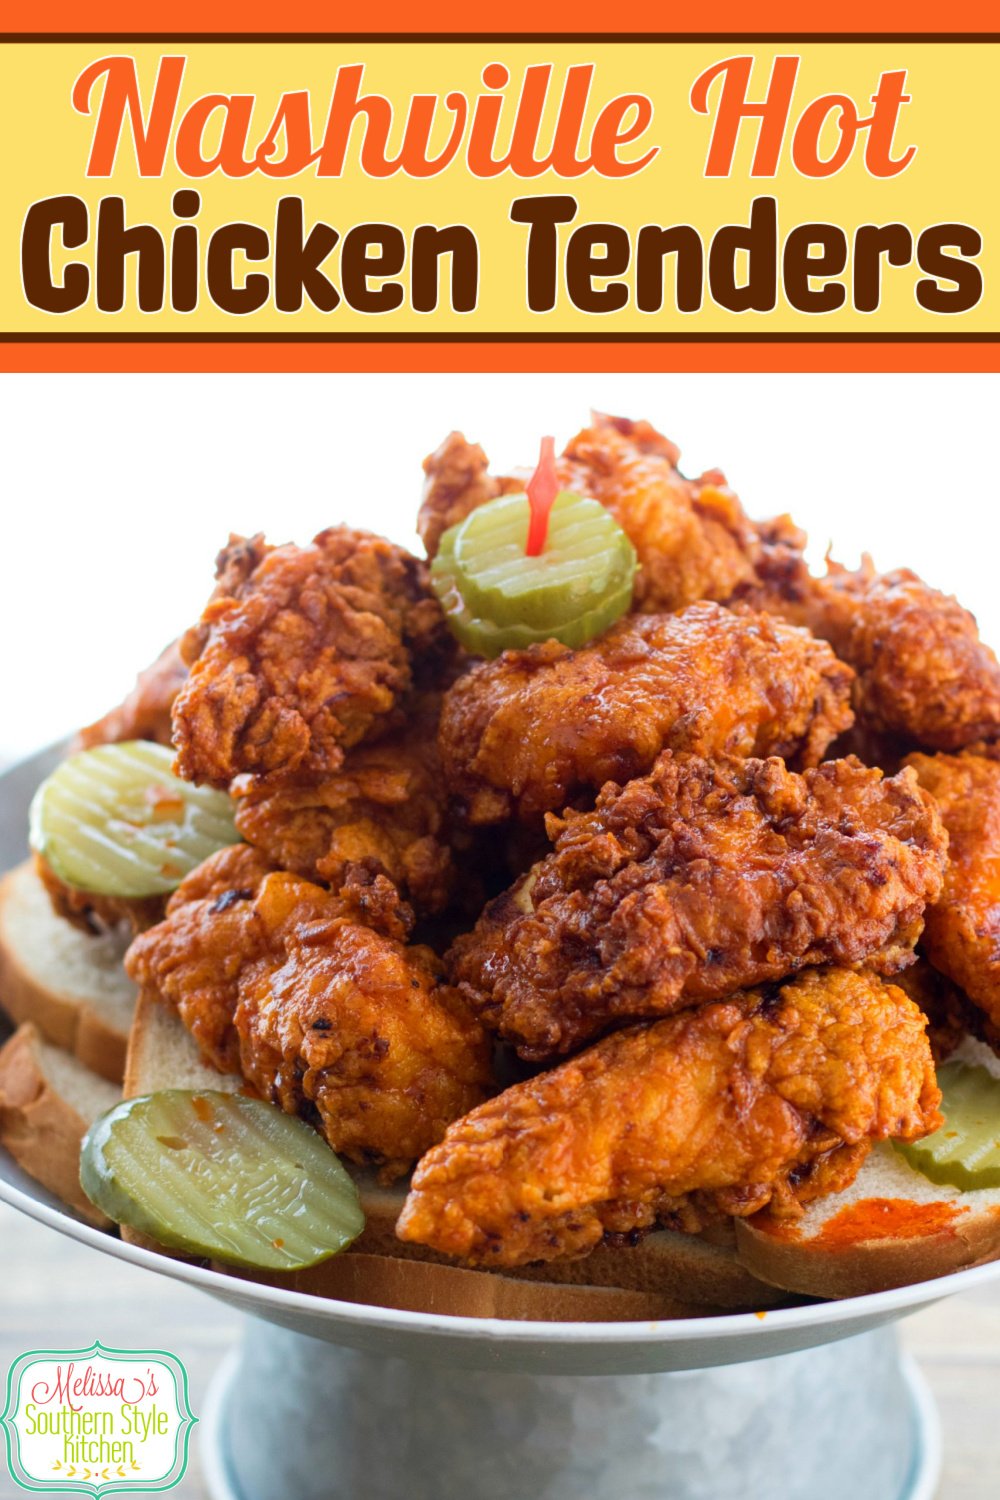 These Nashville Hot Chicken Strips are melt in your mouth tender, and are guaranteed to add a kick to your meal #nashvillehotchickenrecipe #nashvillehotchickenstrips #hotchicken #bestnashvillehotchicken #easychickenbreastrecipes #southernrecipes #southernfood #chicken #chickenbreasts #friedchicken #southernfriedchicken via @melissasssk